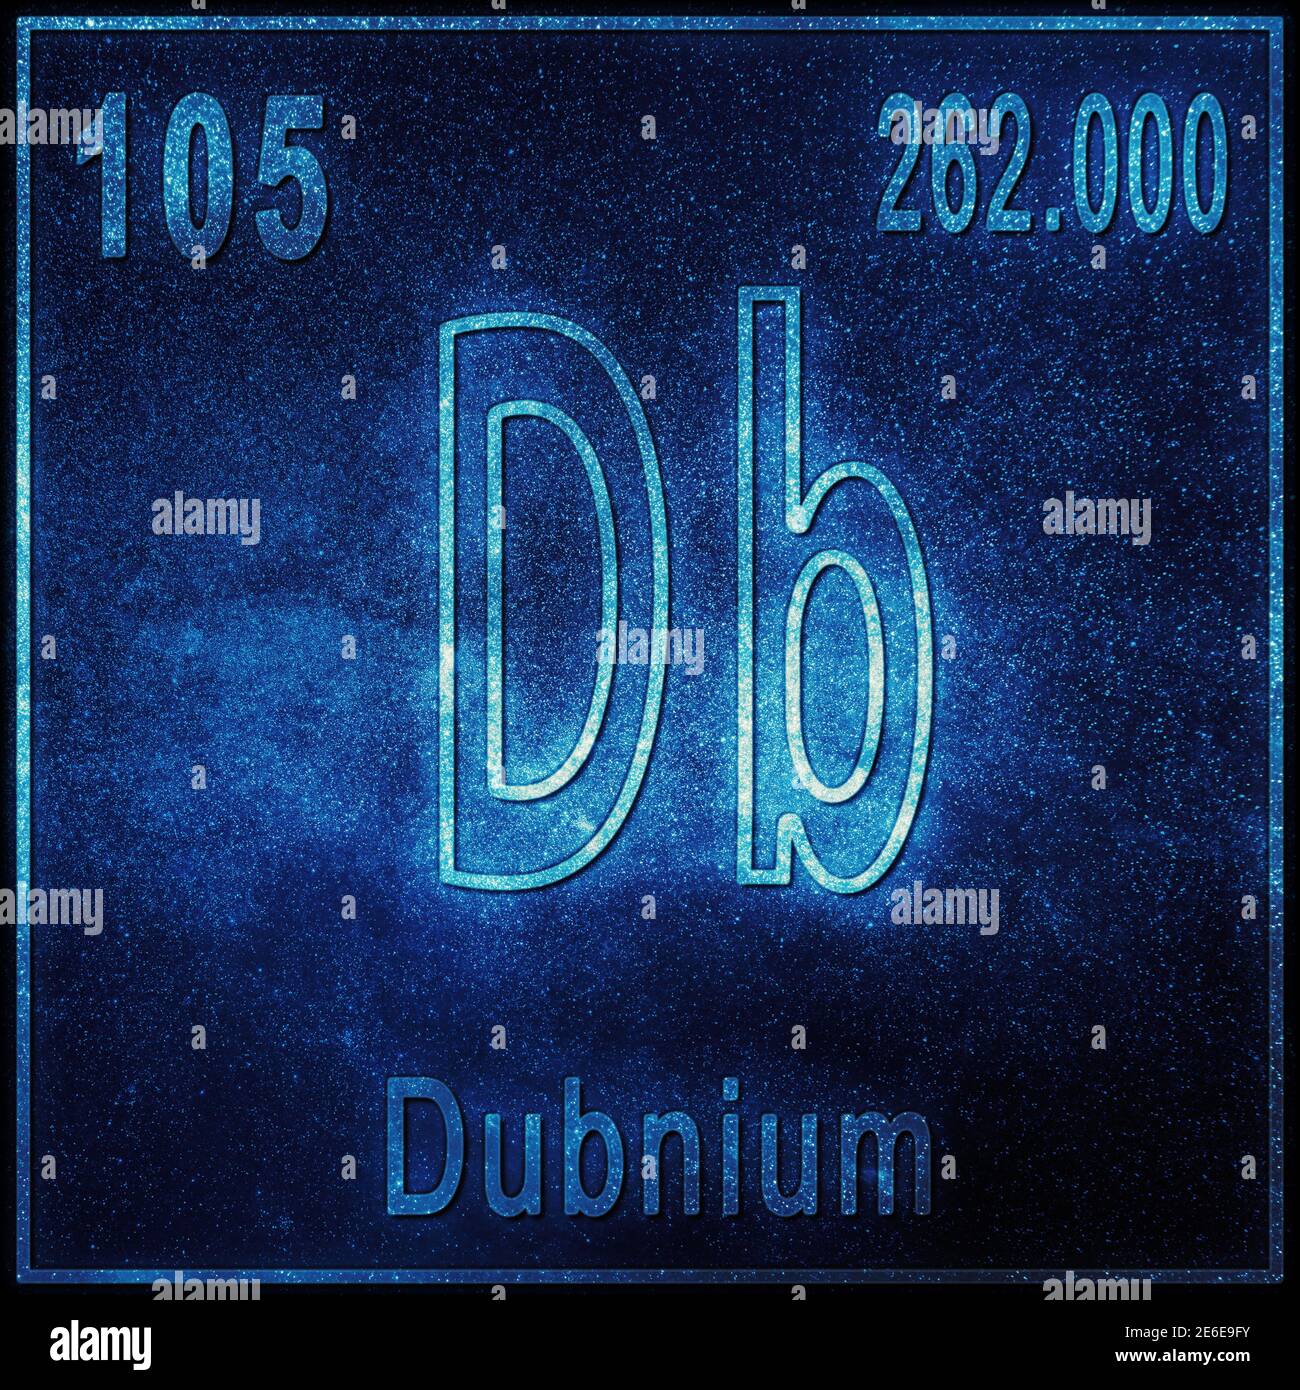 Dubnium chemical element, Sign with atomic number and atomic weight, Periodic Table Element Stock Photo